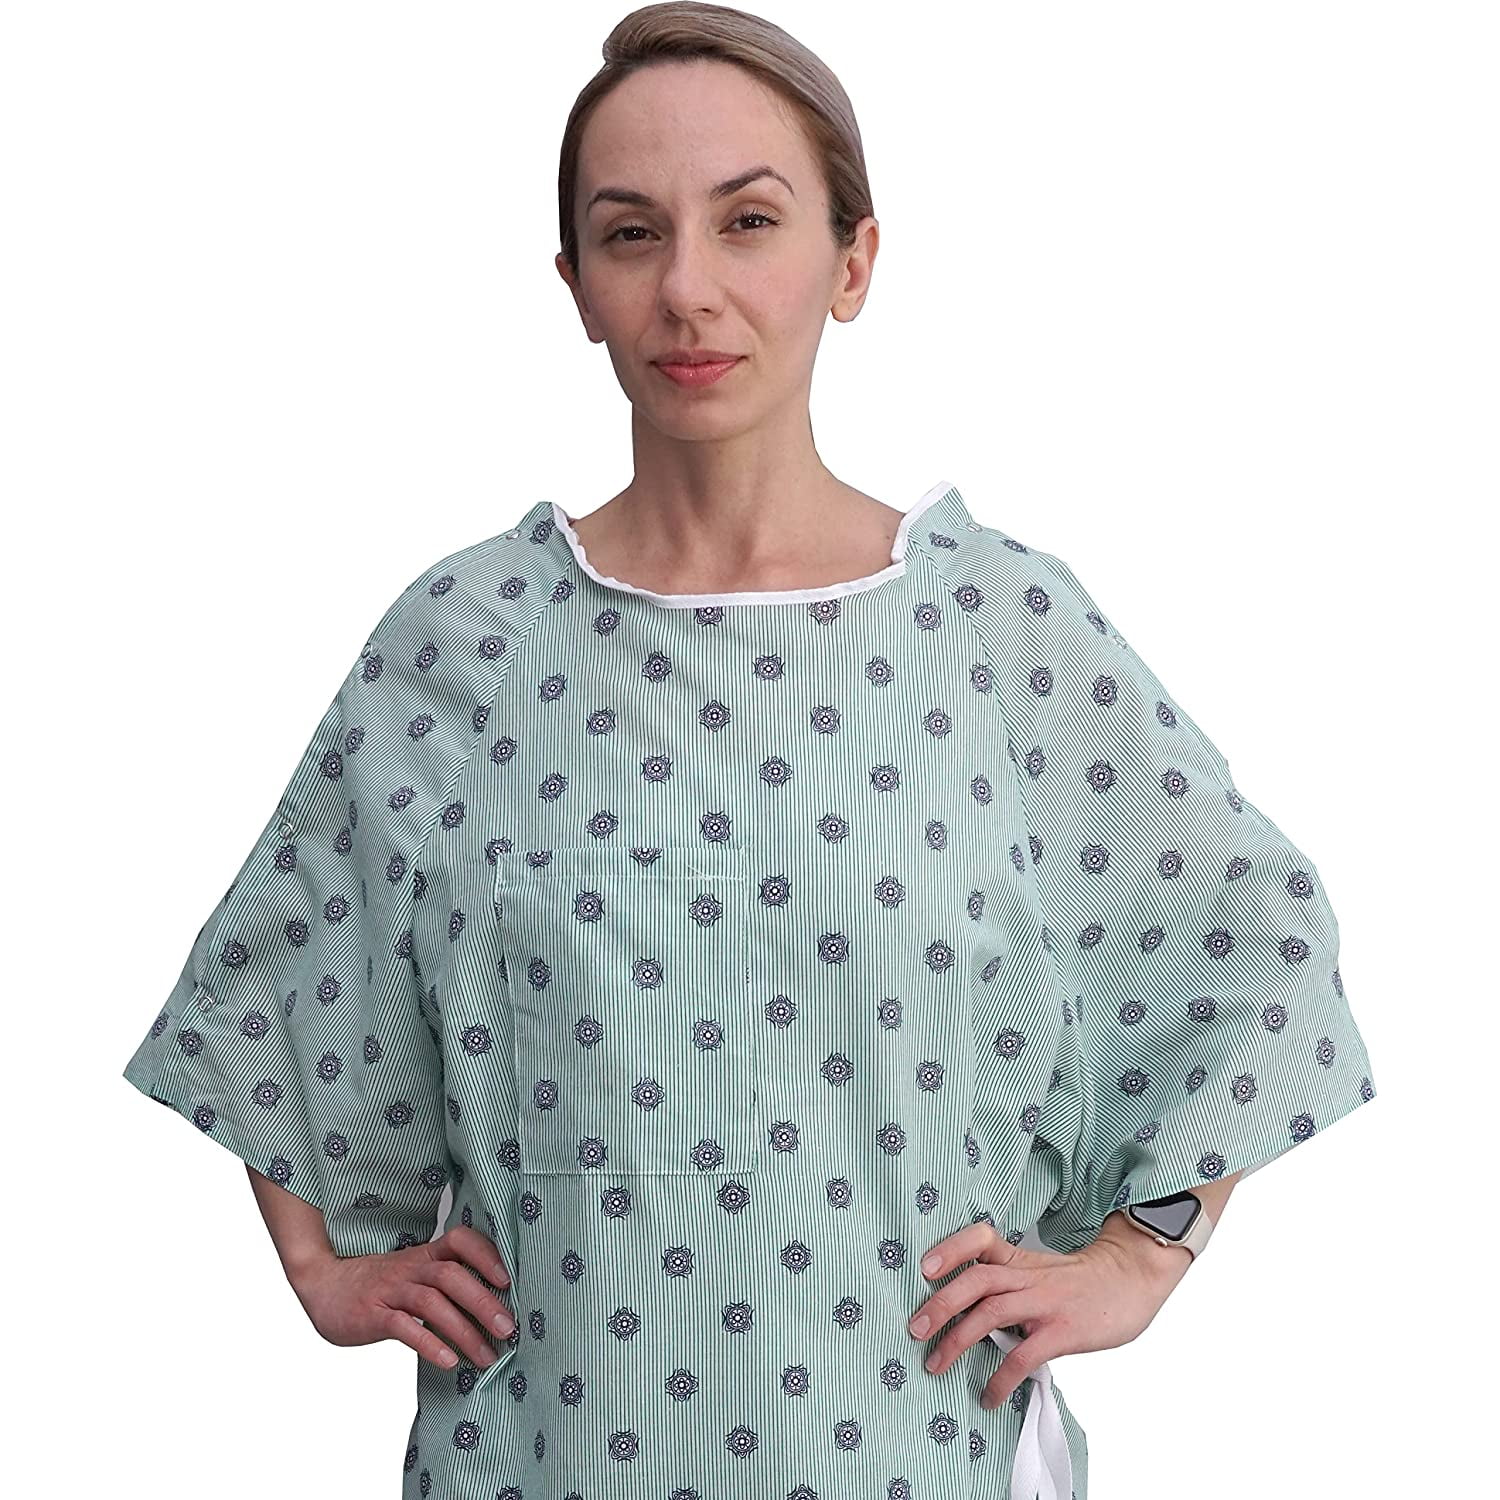 3 Pack Hospital Gown IV Snap Sleeves One Size Fits All Small 2XL Tie Back Imperial Print cdaa061f bc6b 4dc8 ace0 9eec01733fe1.337db1938cc16eb7e6c778eda341d147